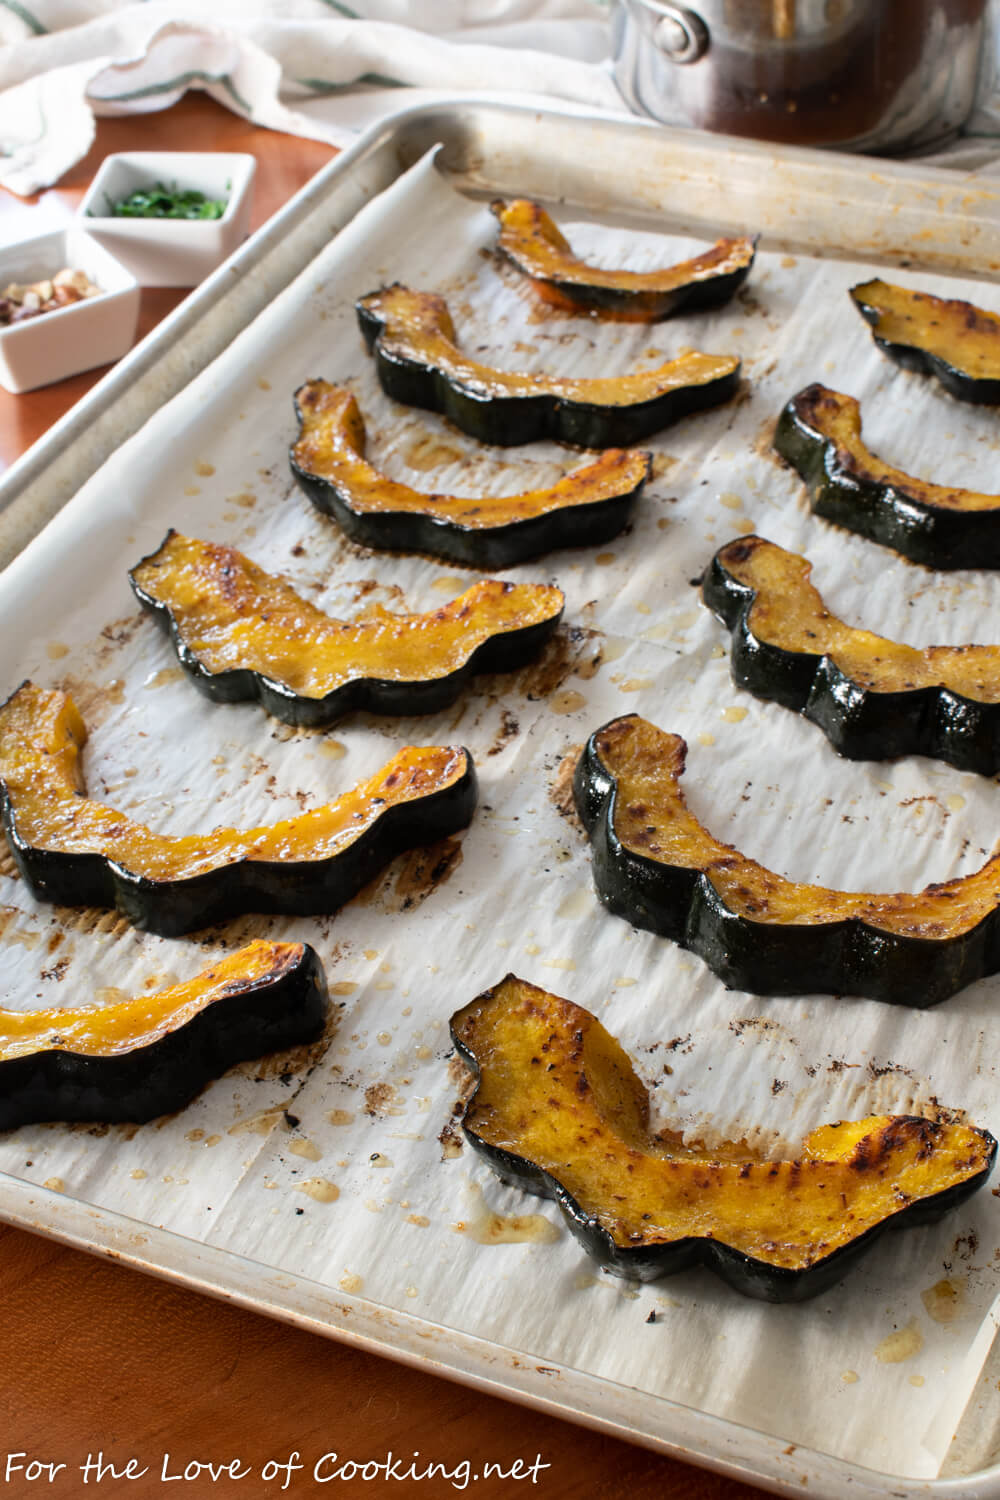 Roasted Acorn Squash with Maple Brown Butter Vinegar Sauce